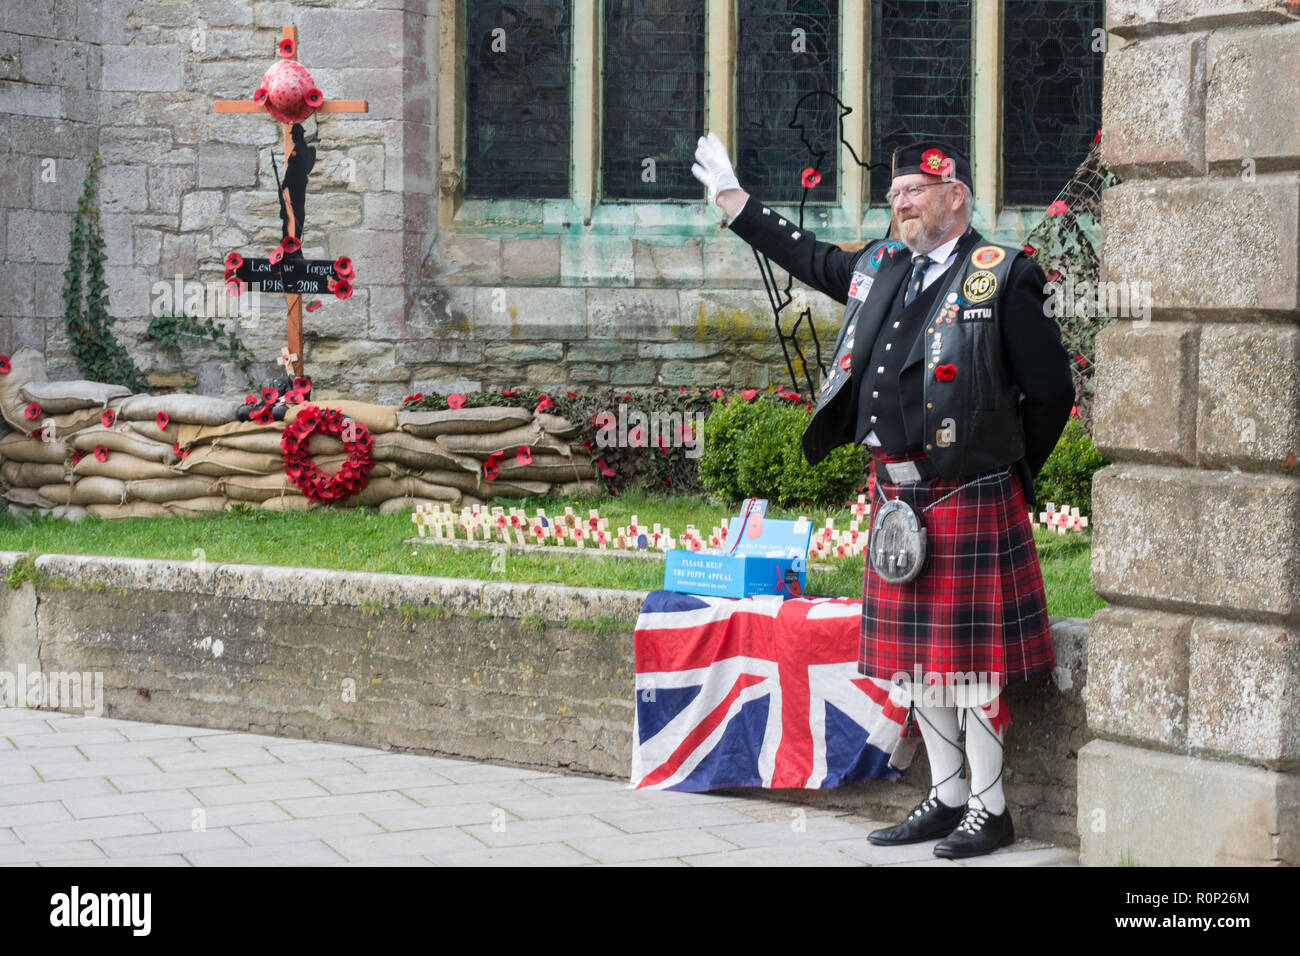 Poppy seller wearing a uniform with a kilt selling poppies for the Royal British Legion charity outside a church Stock Photo